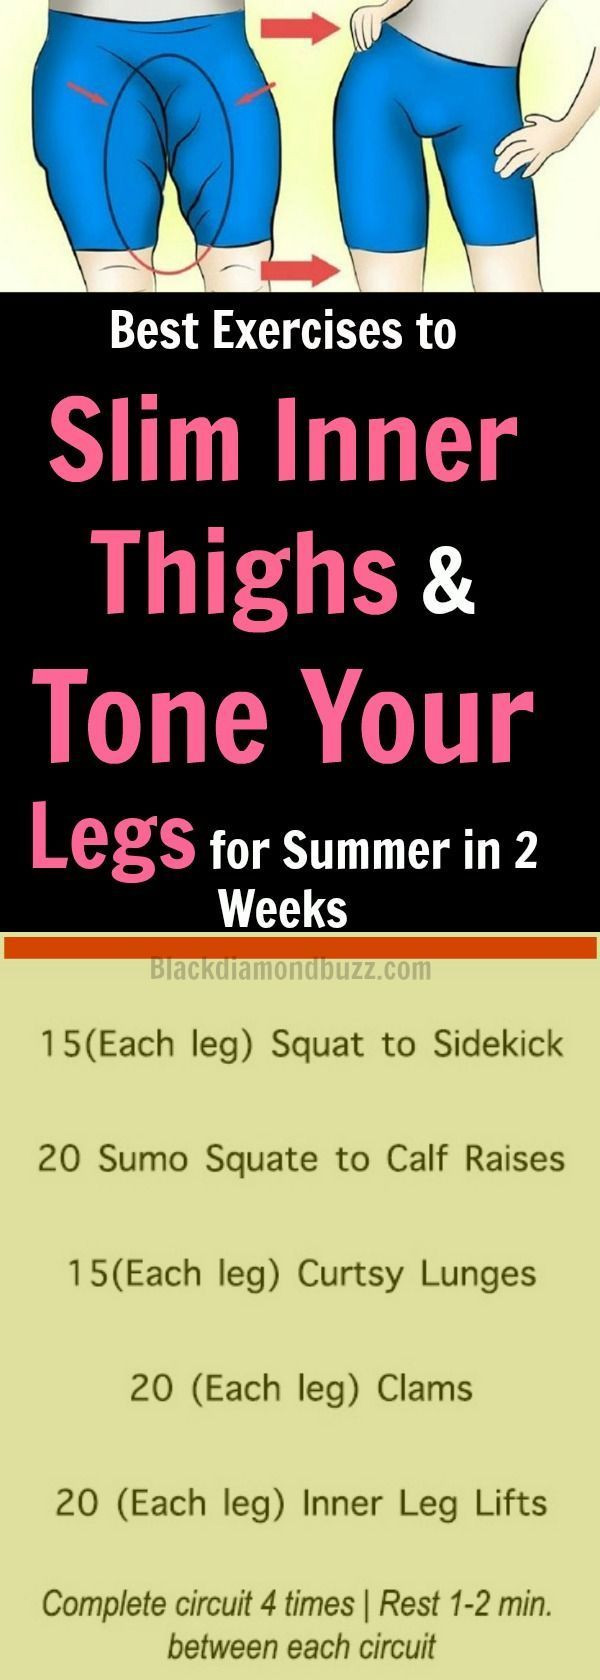 How To Lose Weight In Your Legs Fast
 Best Exercises to Slim Inner Thighs and Tone Your Legs for